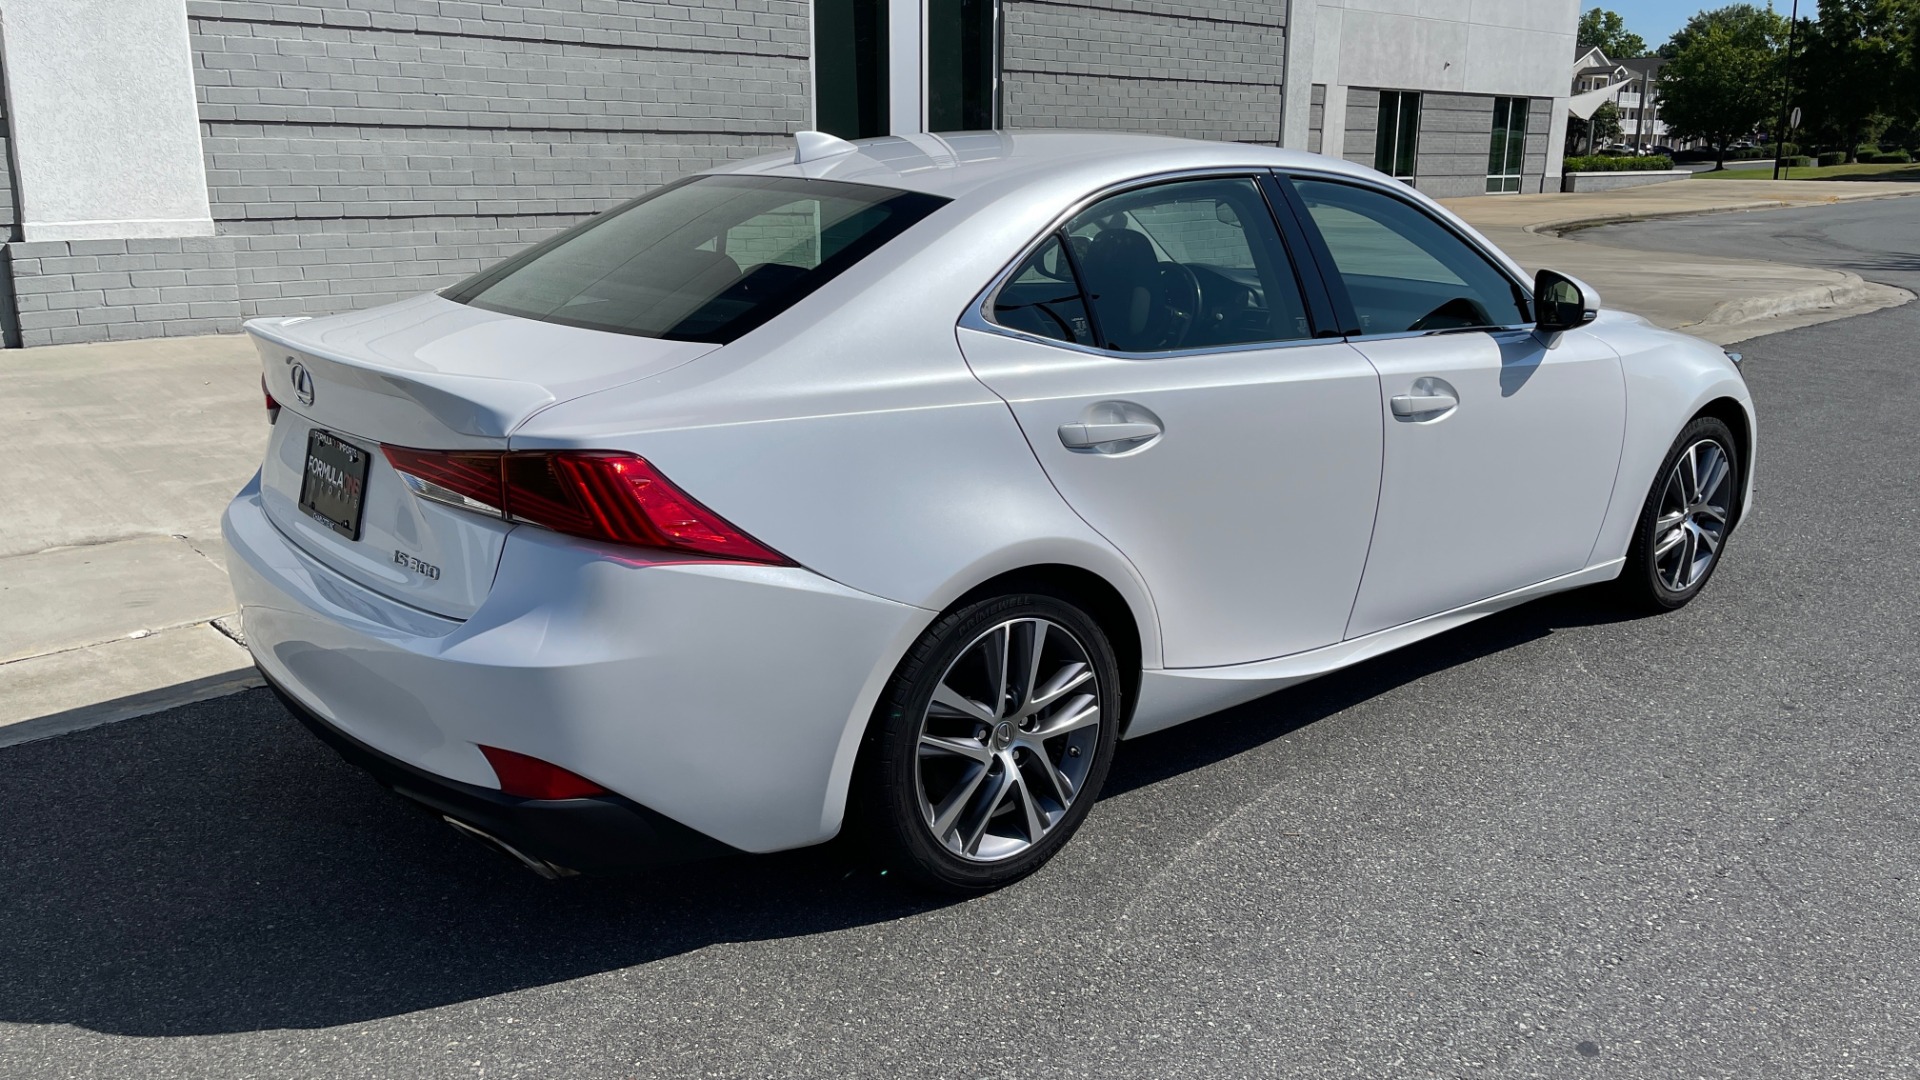 Used 2018 Lexus IS 300 / 2.0L TURBO / 8-SPD AUTO / SUNROOF / REARVIEW for sale Sold at Formula Imports in Charlotte NC 28227 2